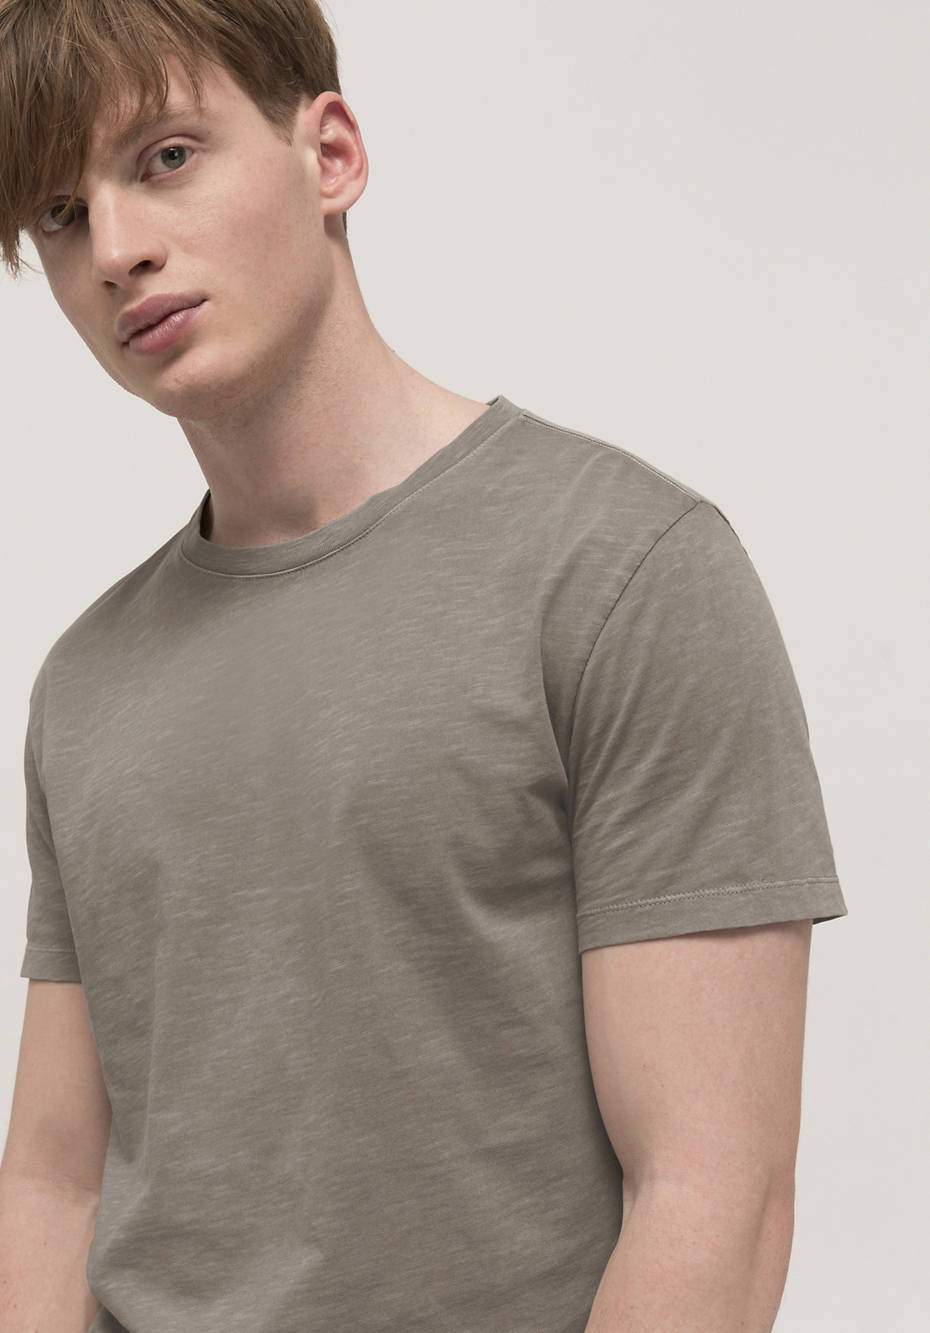 Mineral-dyed t-shirt made from pure organic cotton